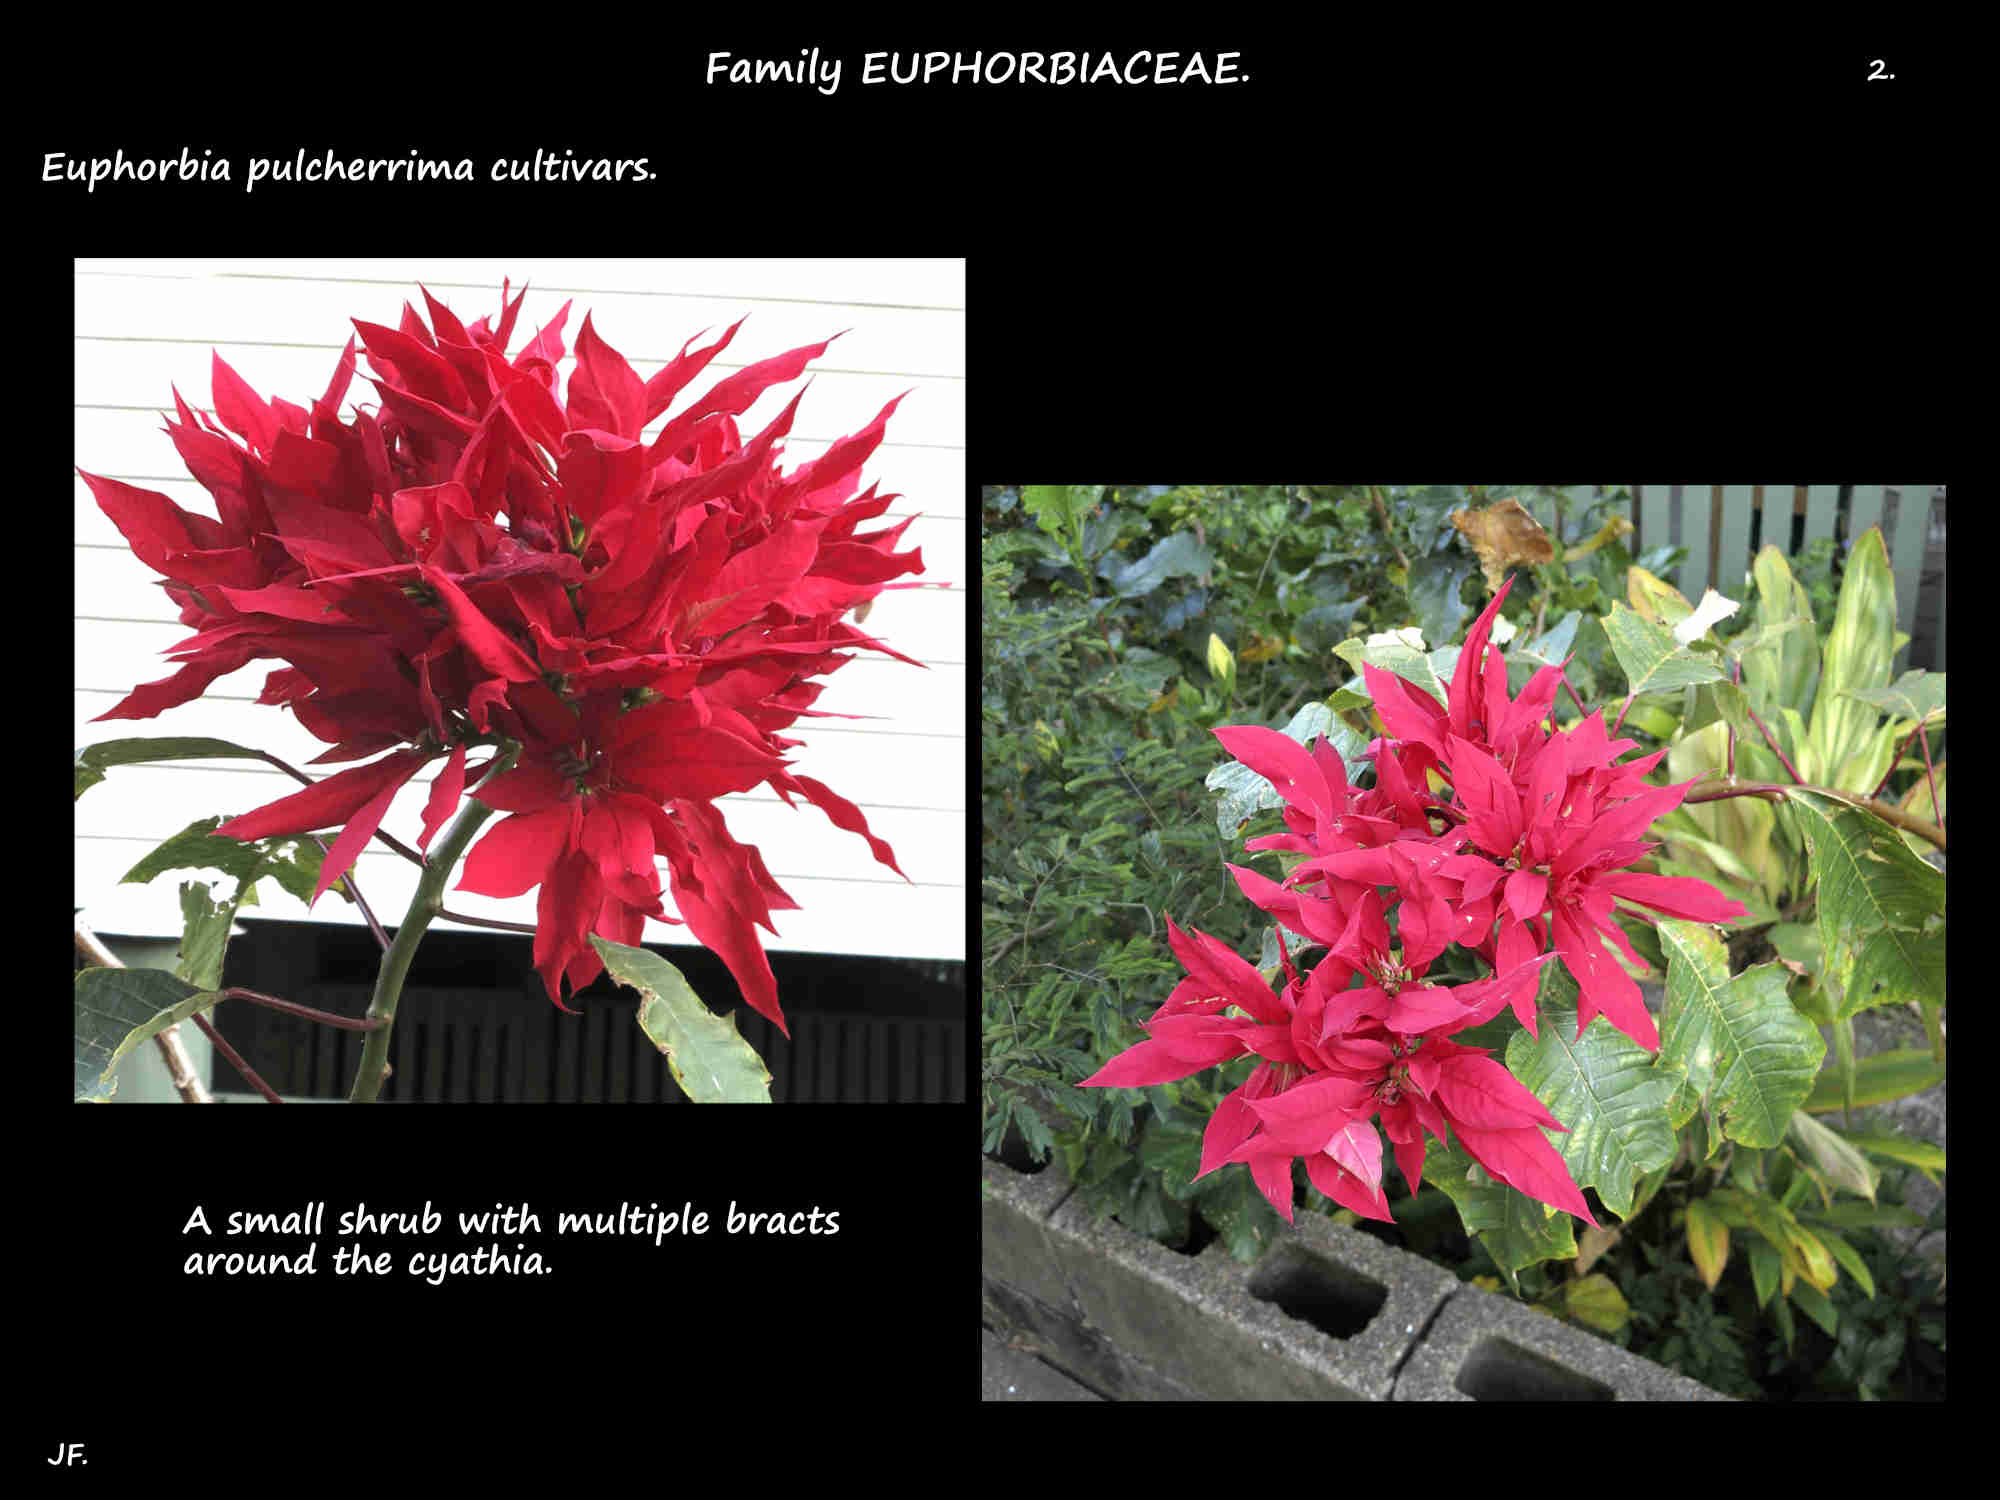 2 A small poinsettia shrub with large red inflorescences